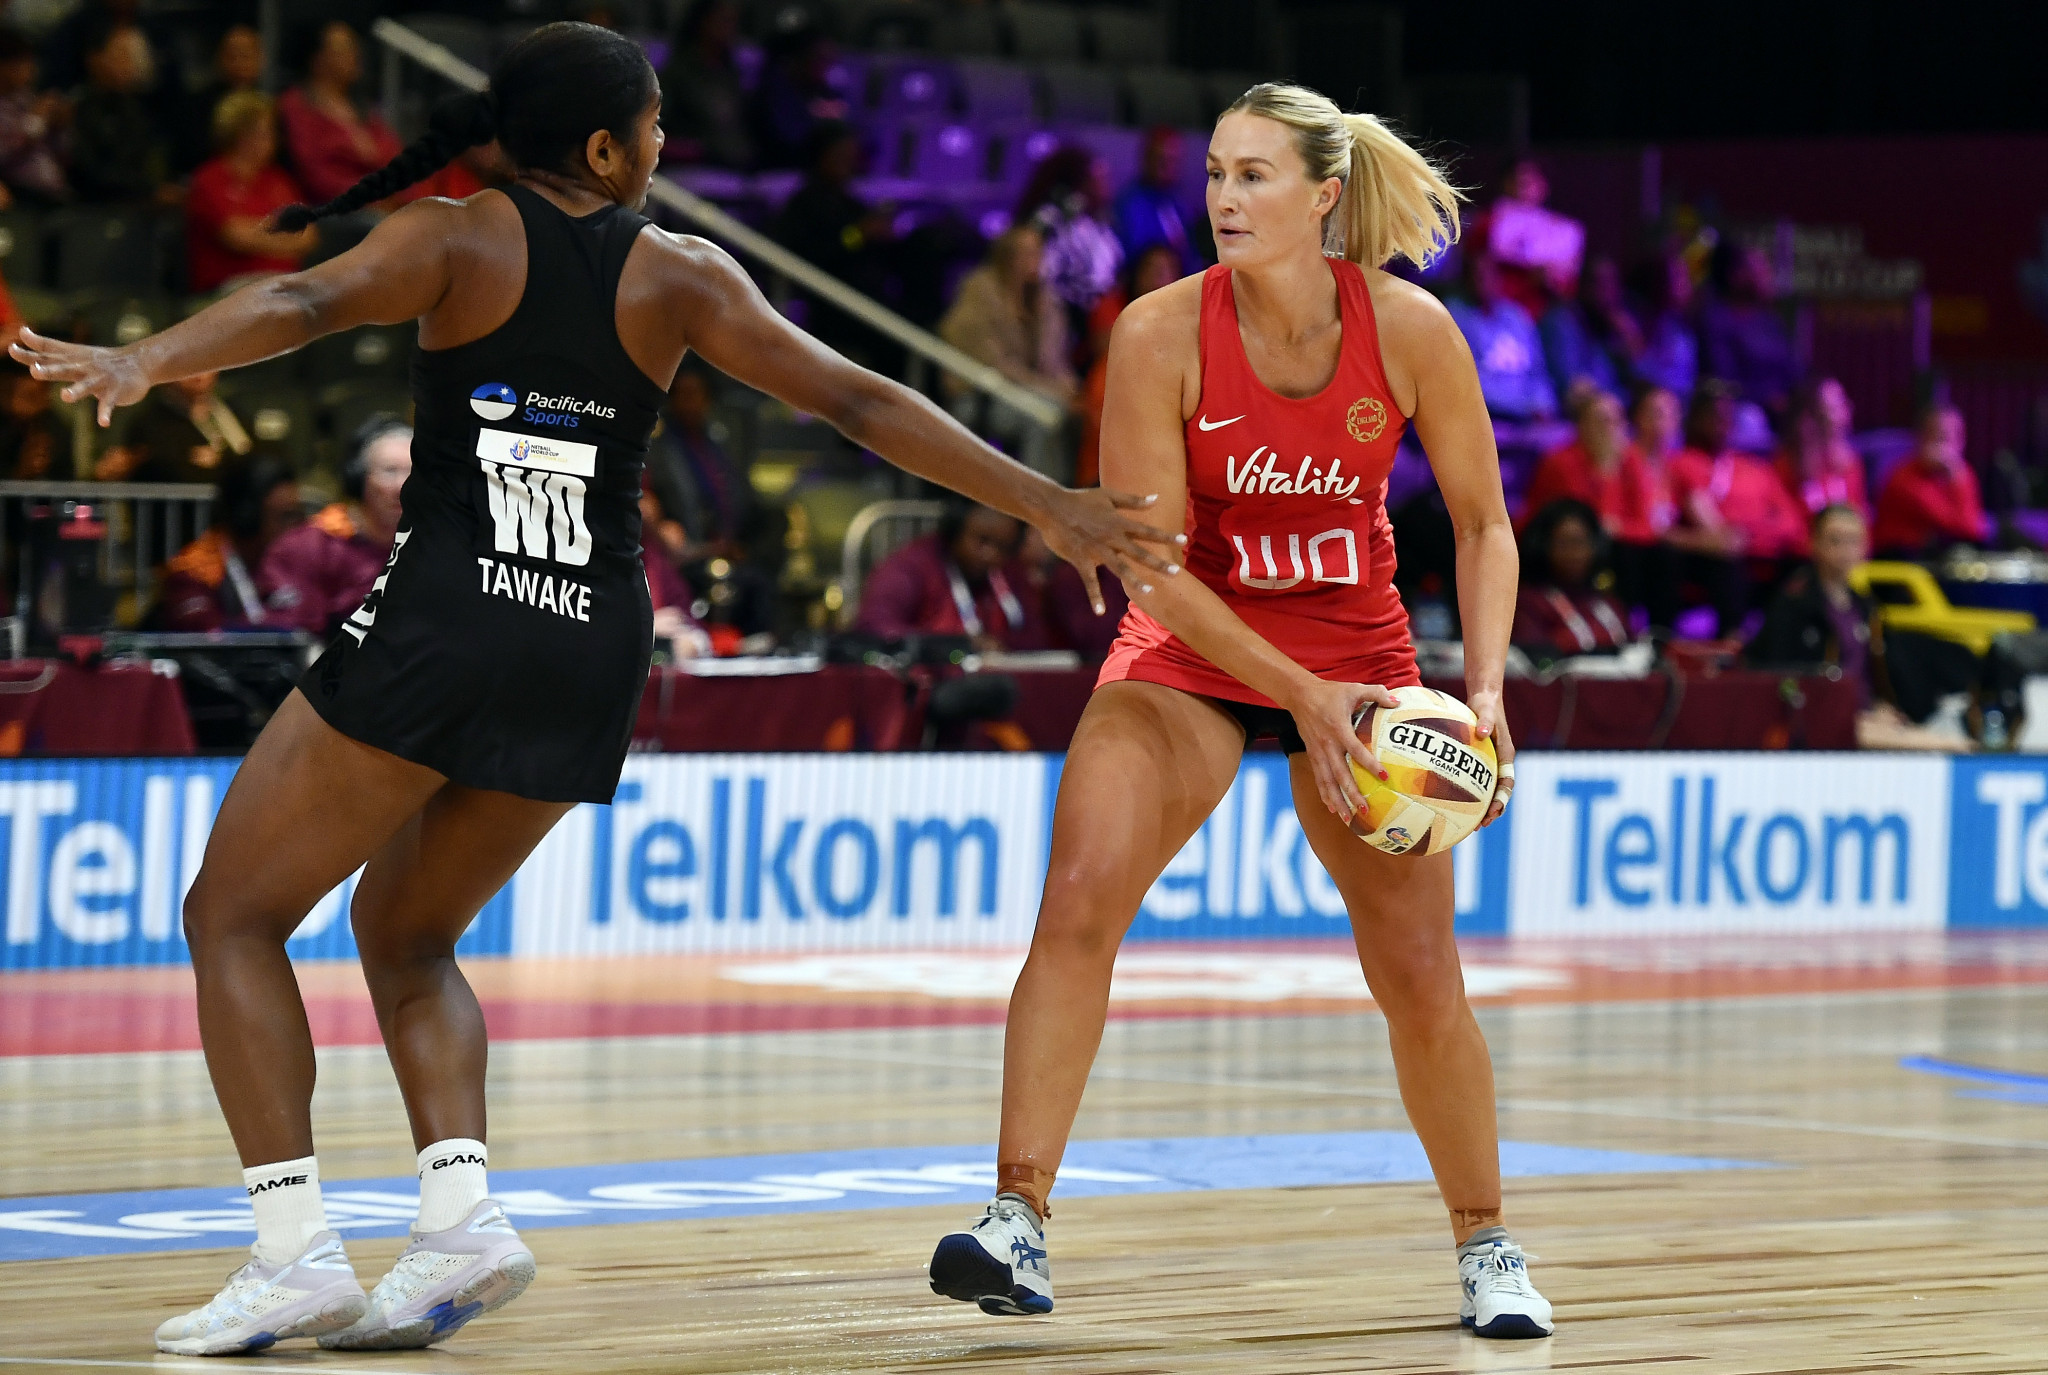 England dominated Fiji in Cape Town as they continue their quest for a first Netball World Cup gold medal ©Getty Images